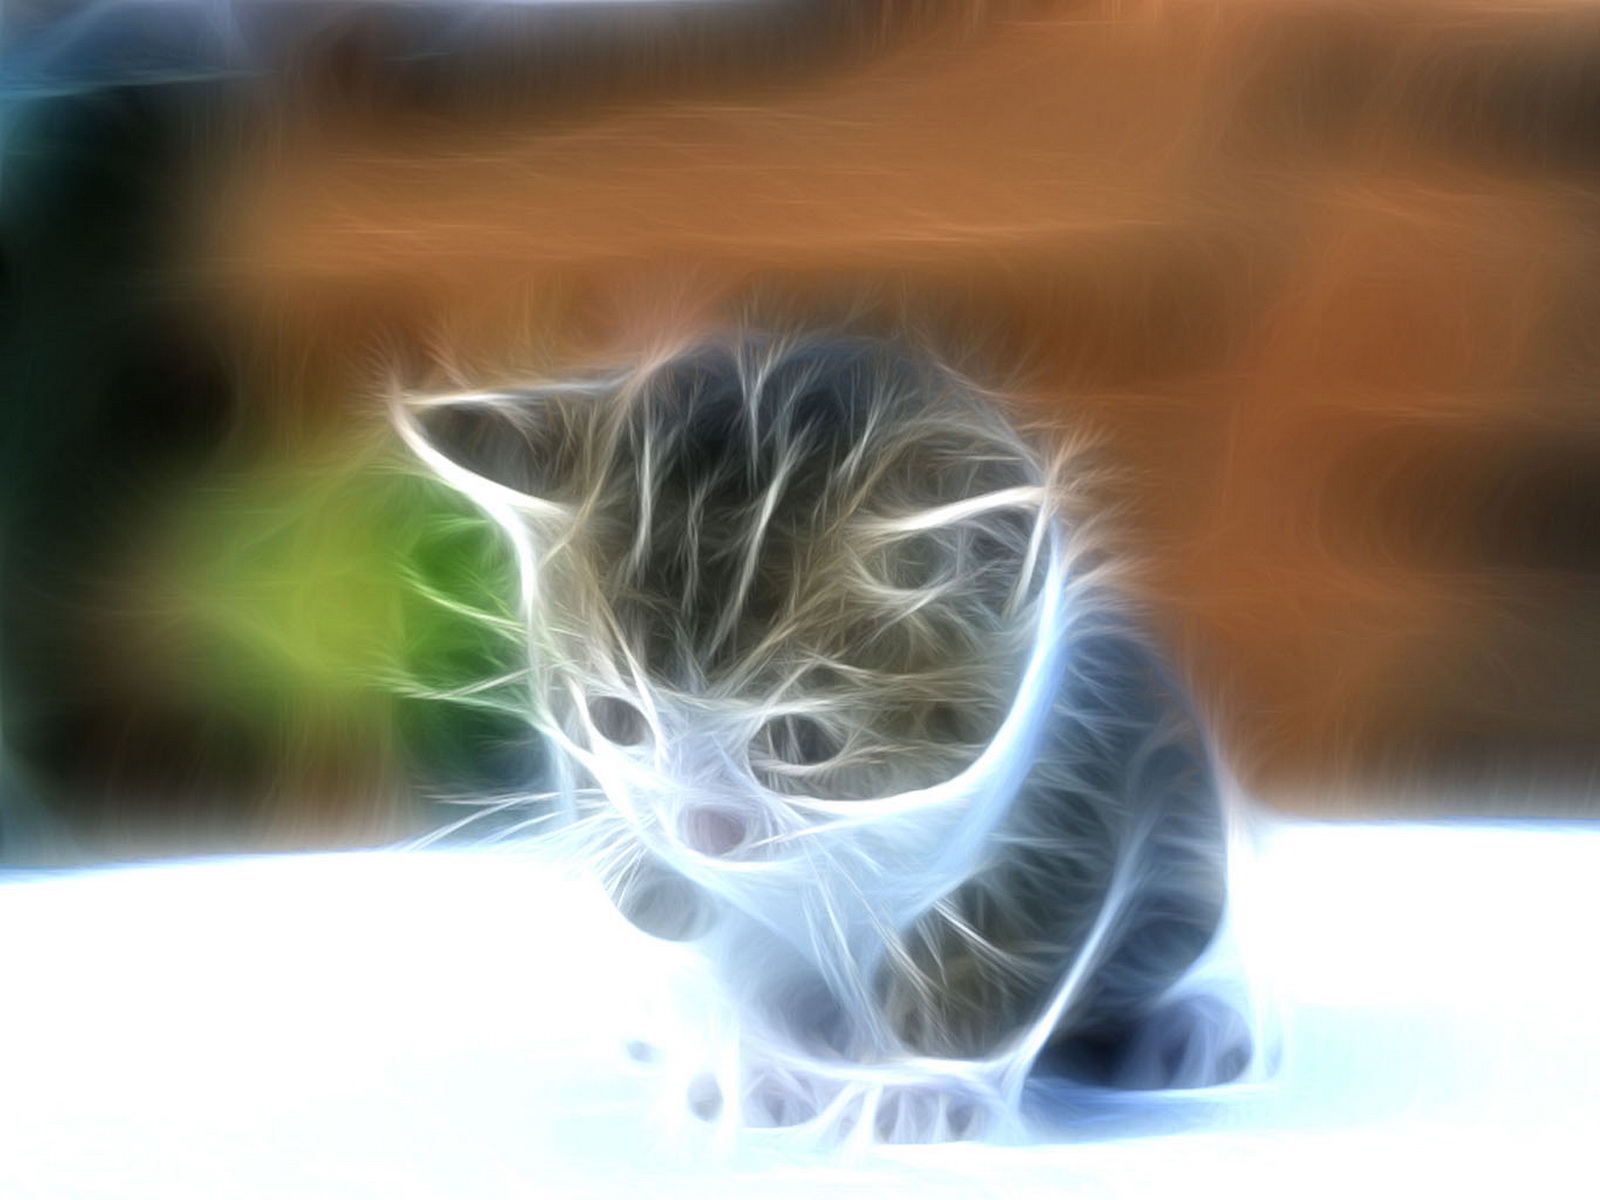 Evening with kitten image